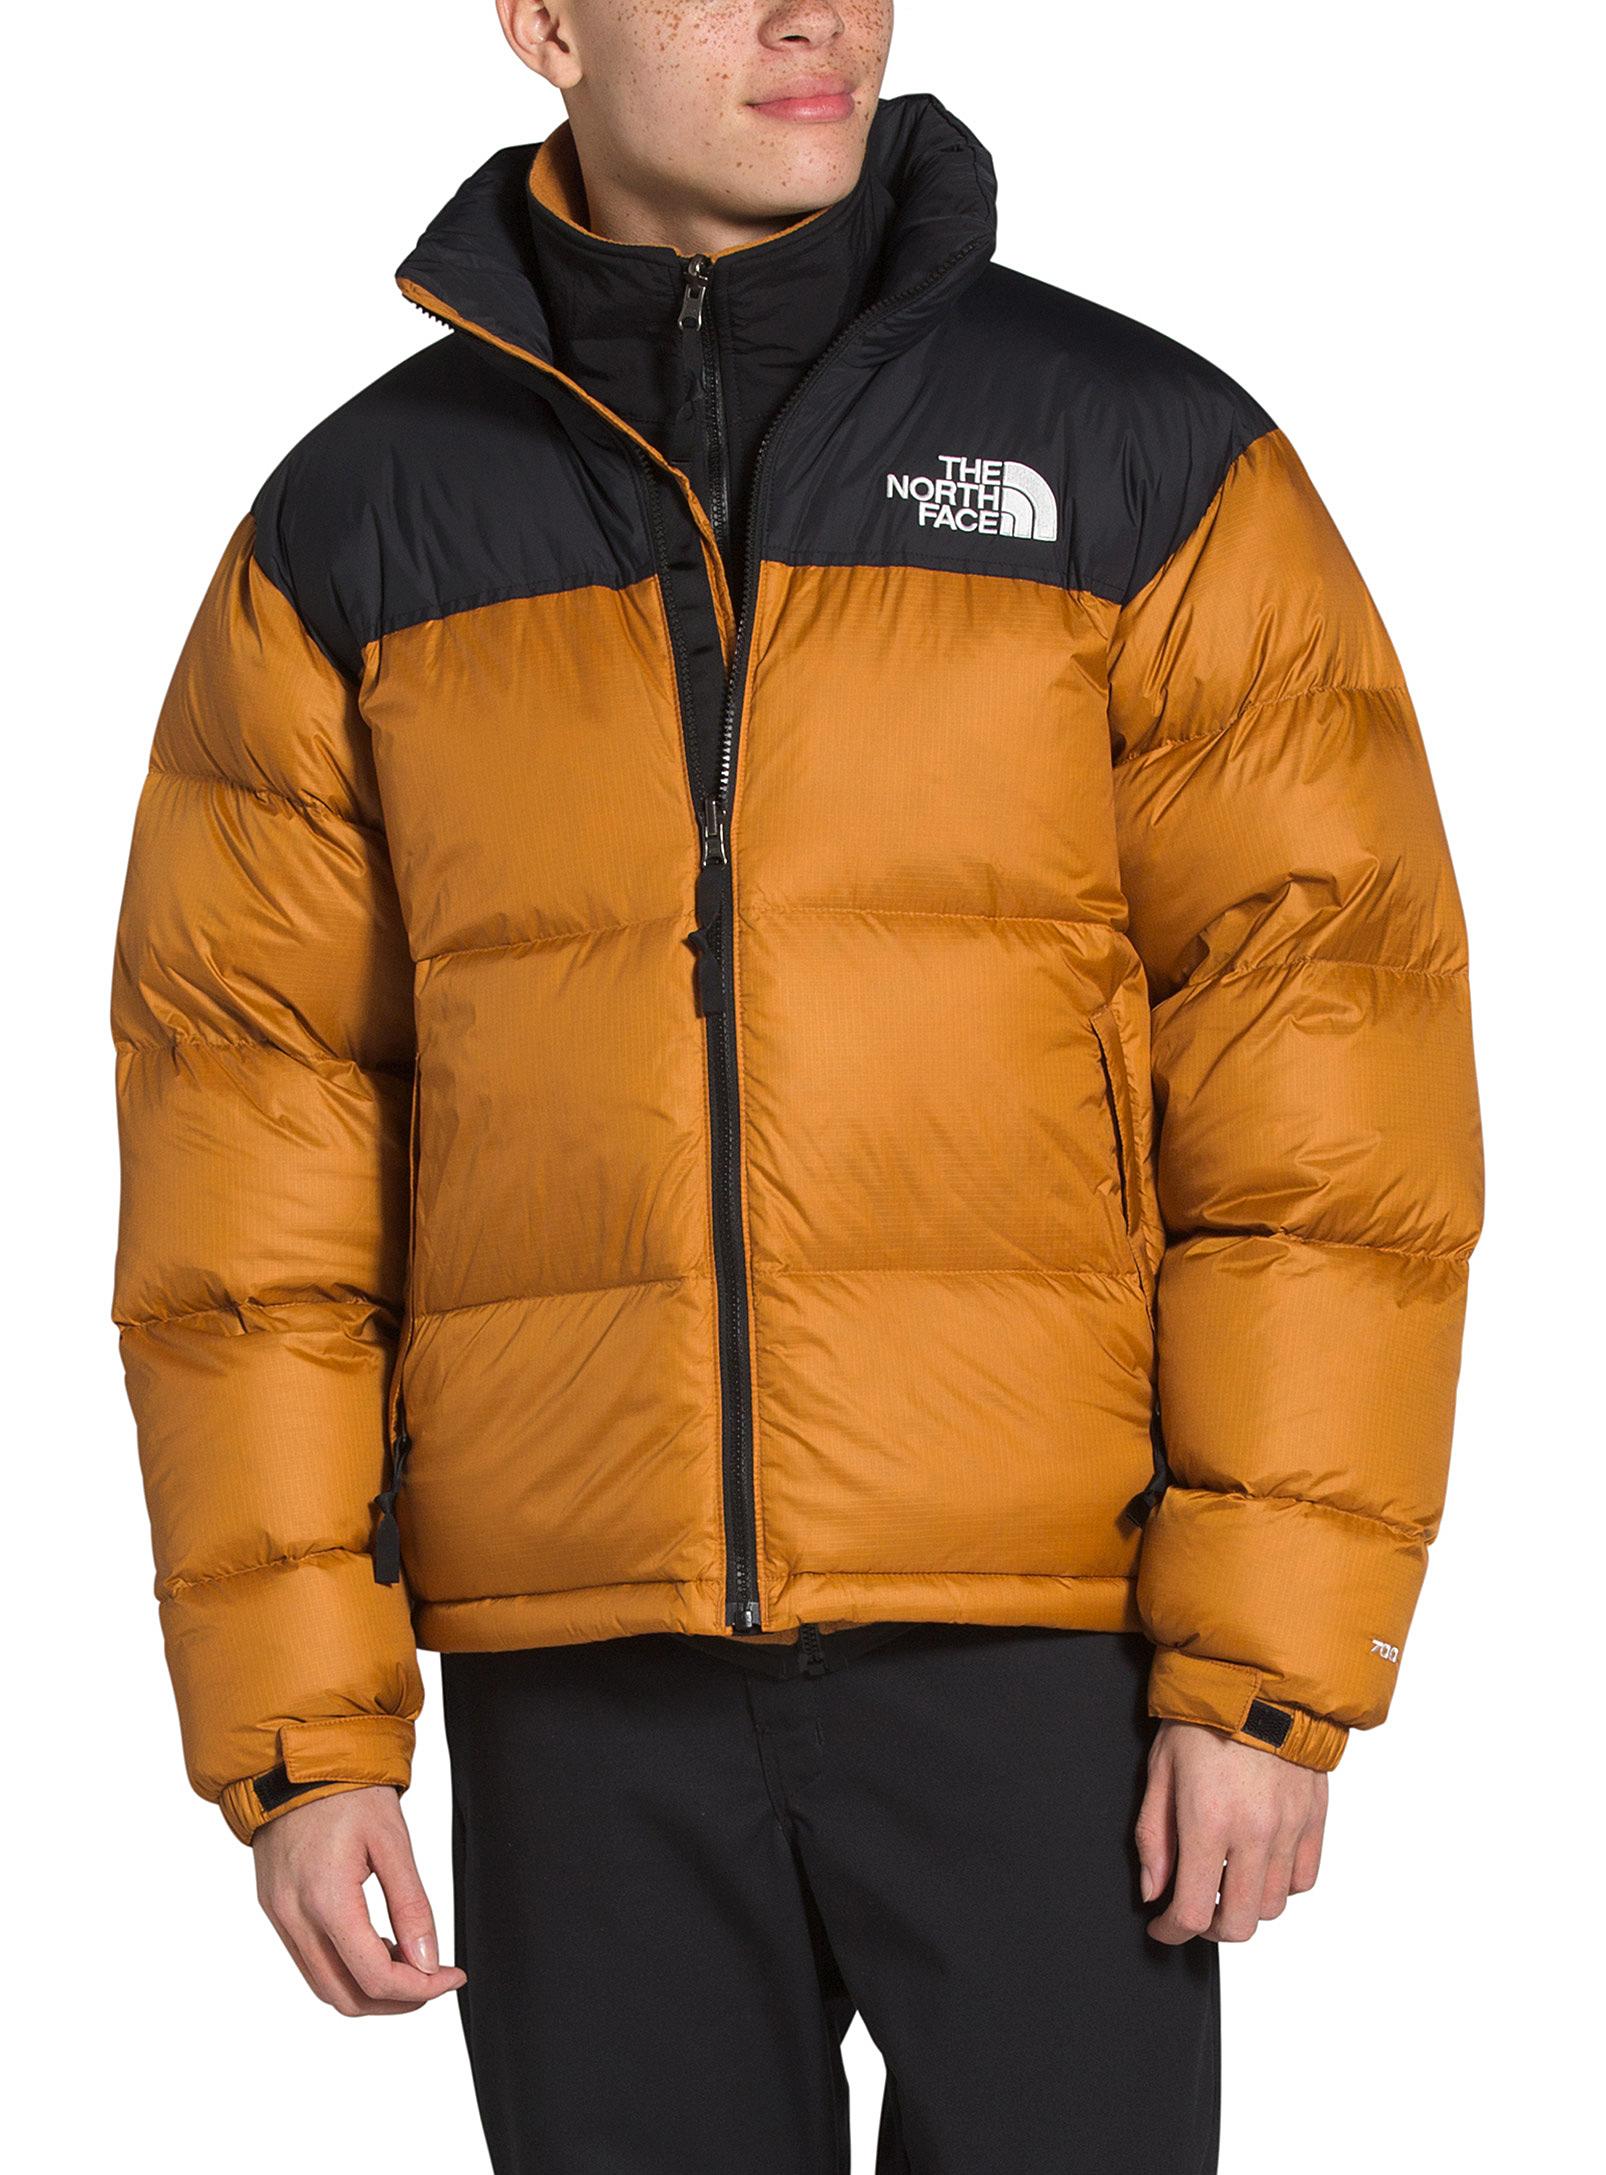 The North Face Synthetic Nuptse Retro Puffer Jacket for Men - Lyst